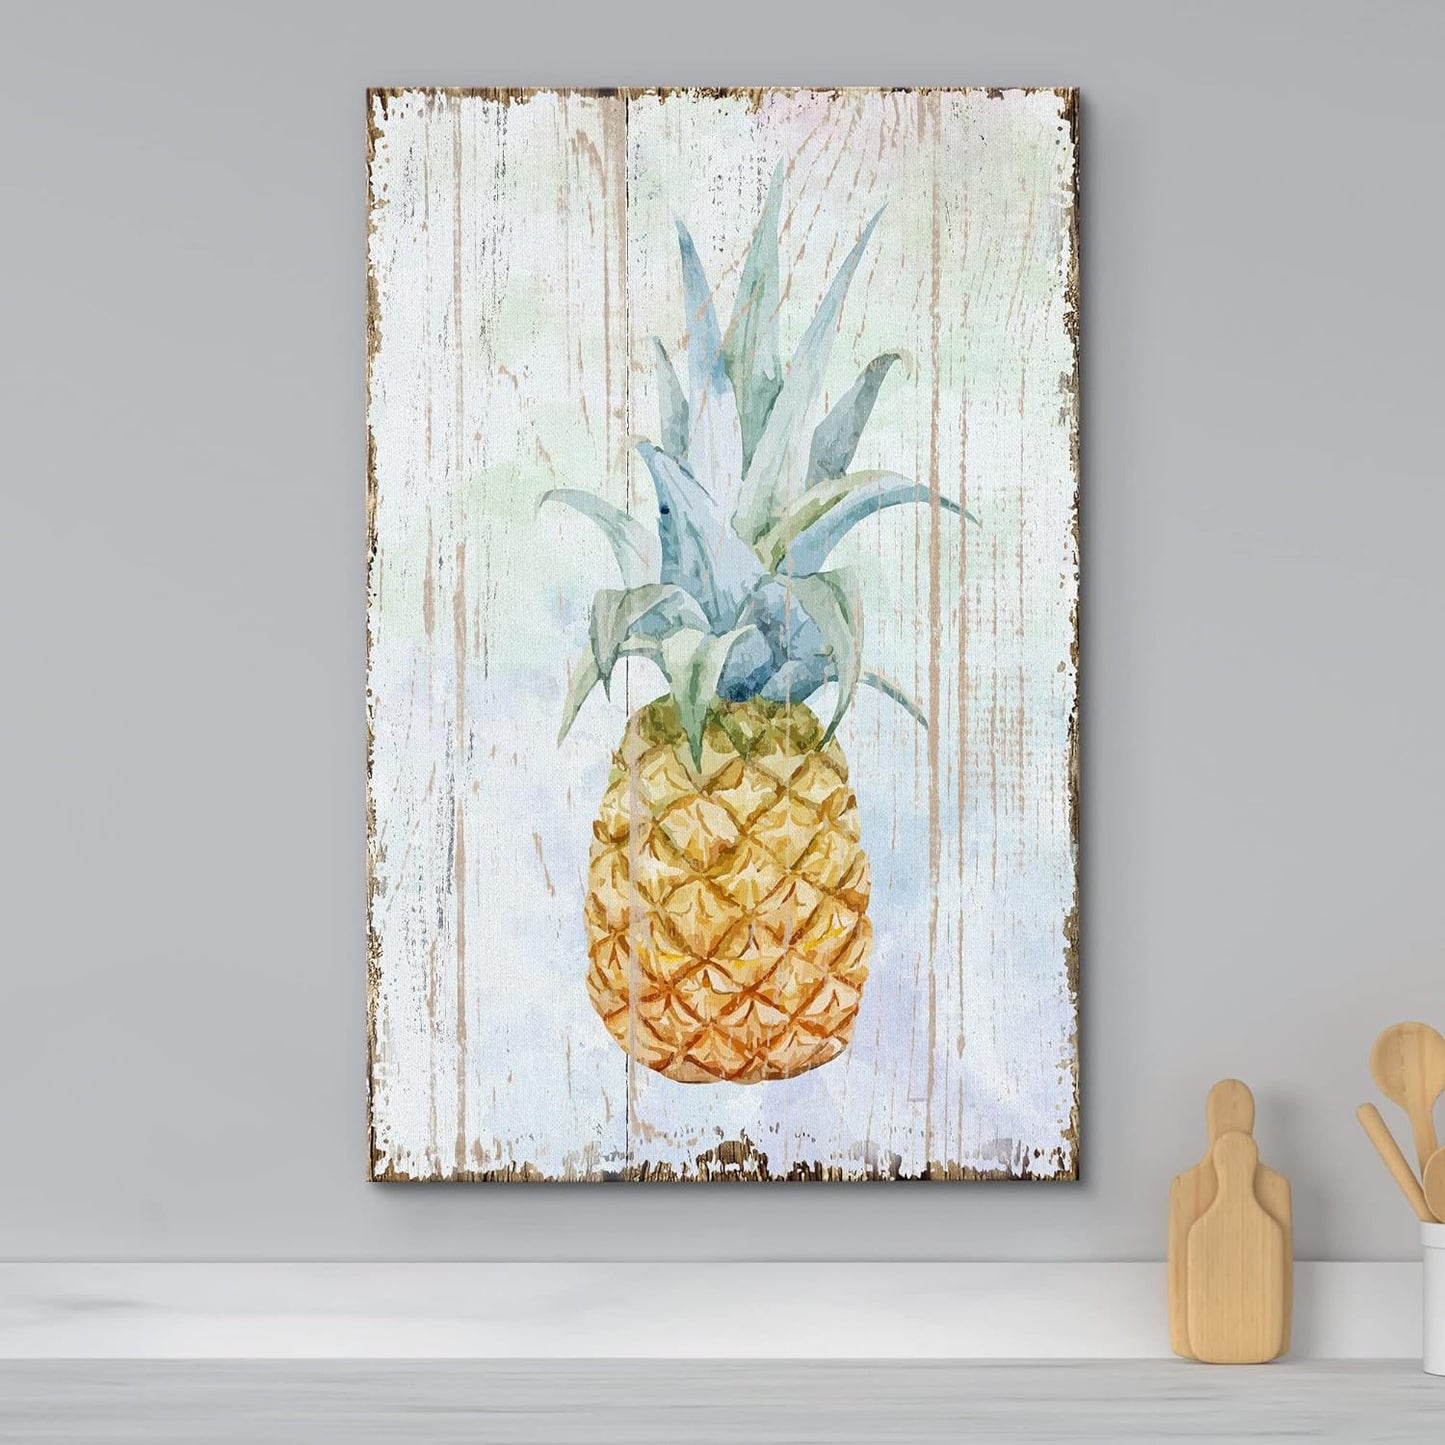 - Canvas Wall Art - Pineapple on Wood Style Background - Giclee Print Gallery Wrap Modern Home Art | Ready to Hang - 16X24 Inches